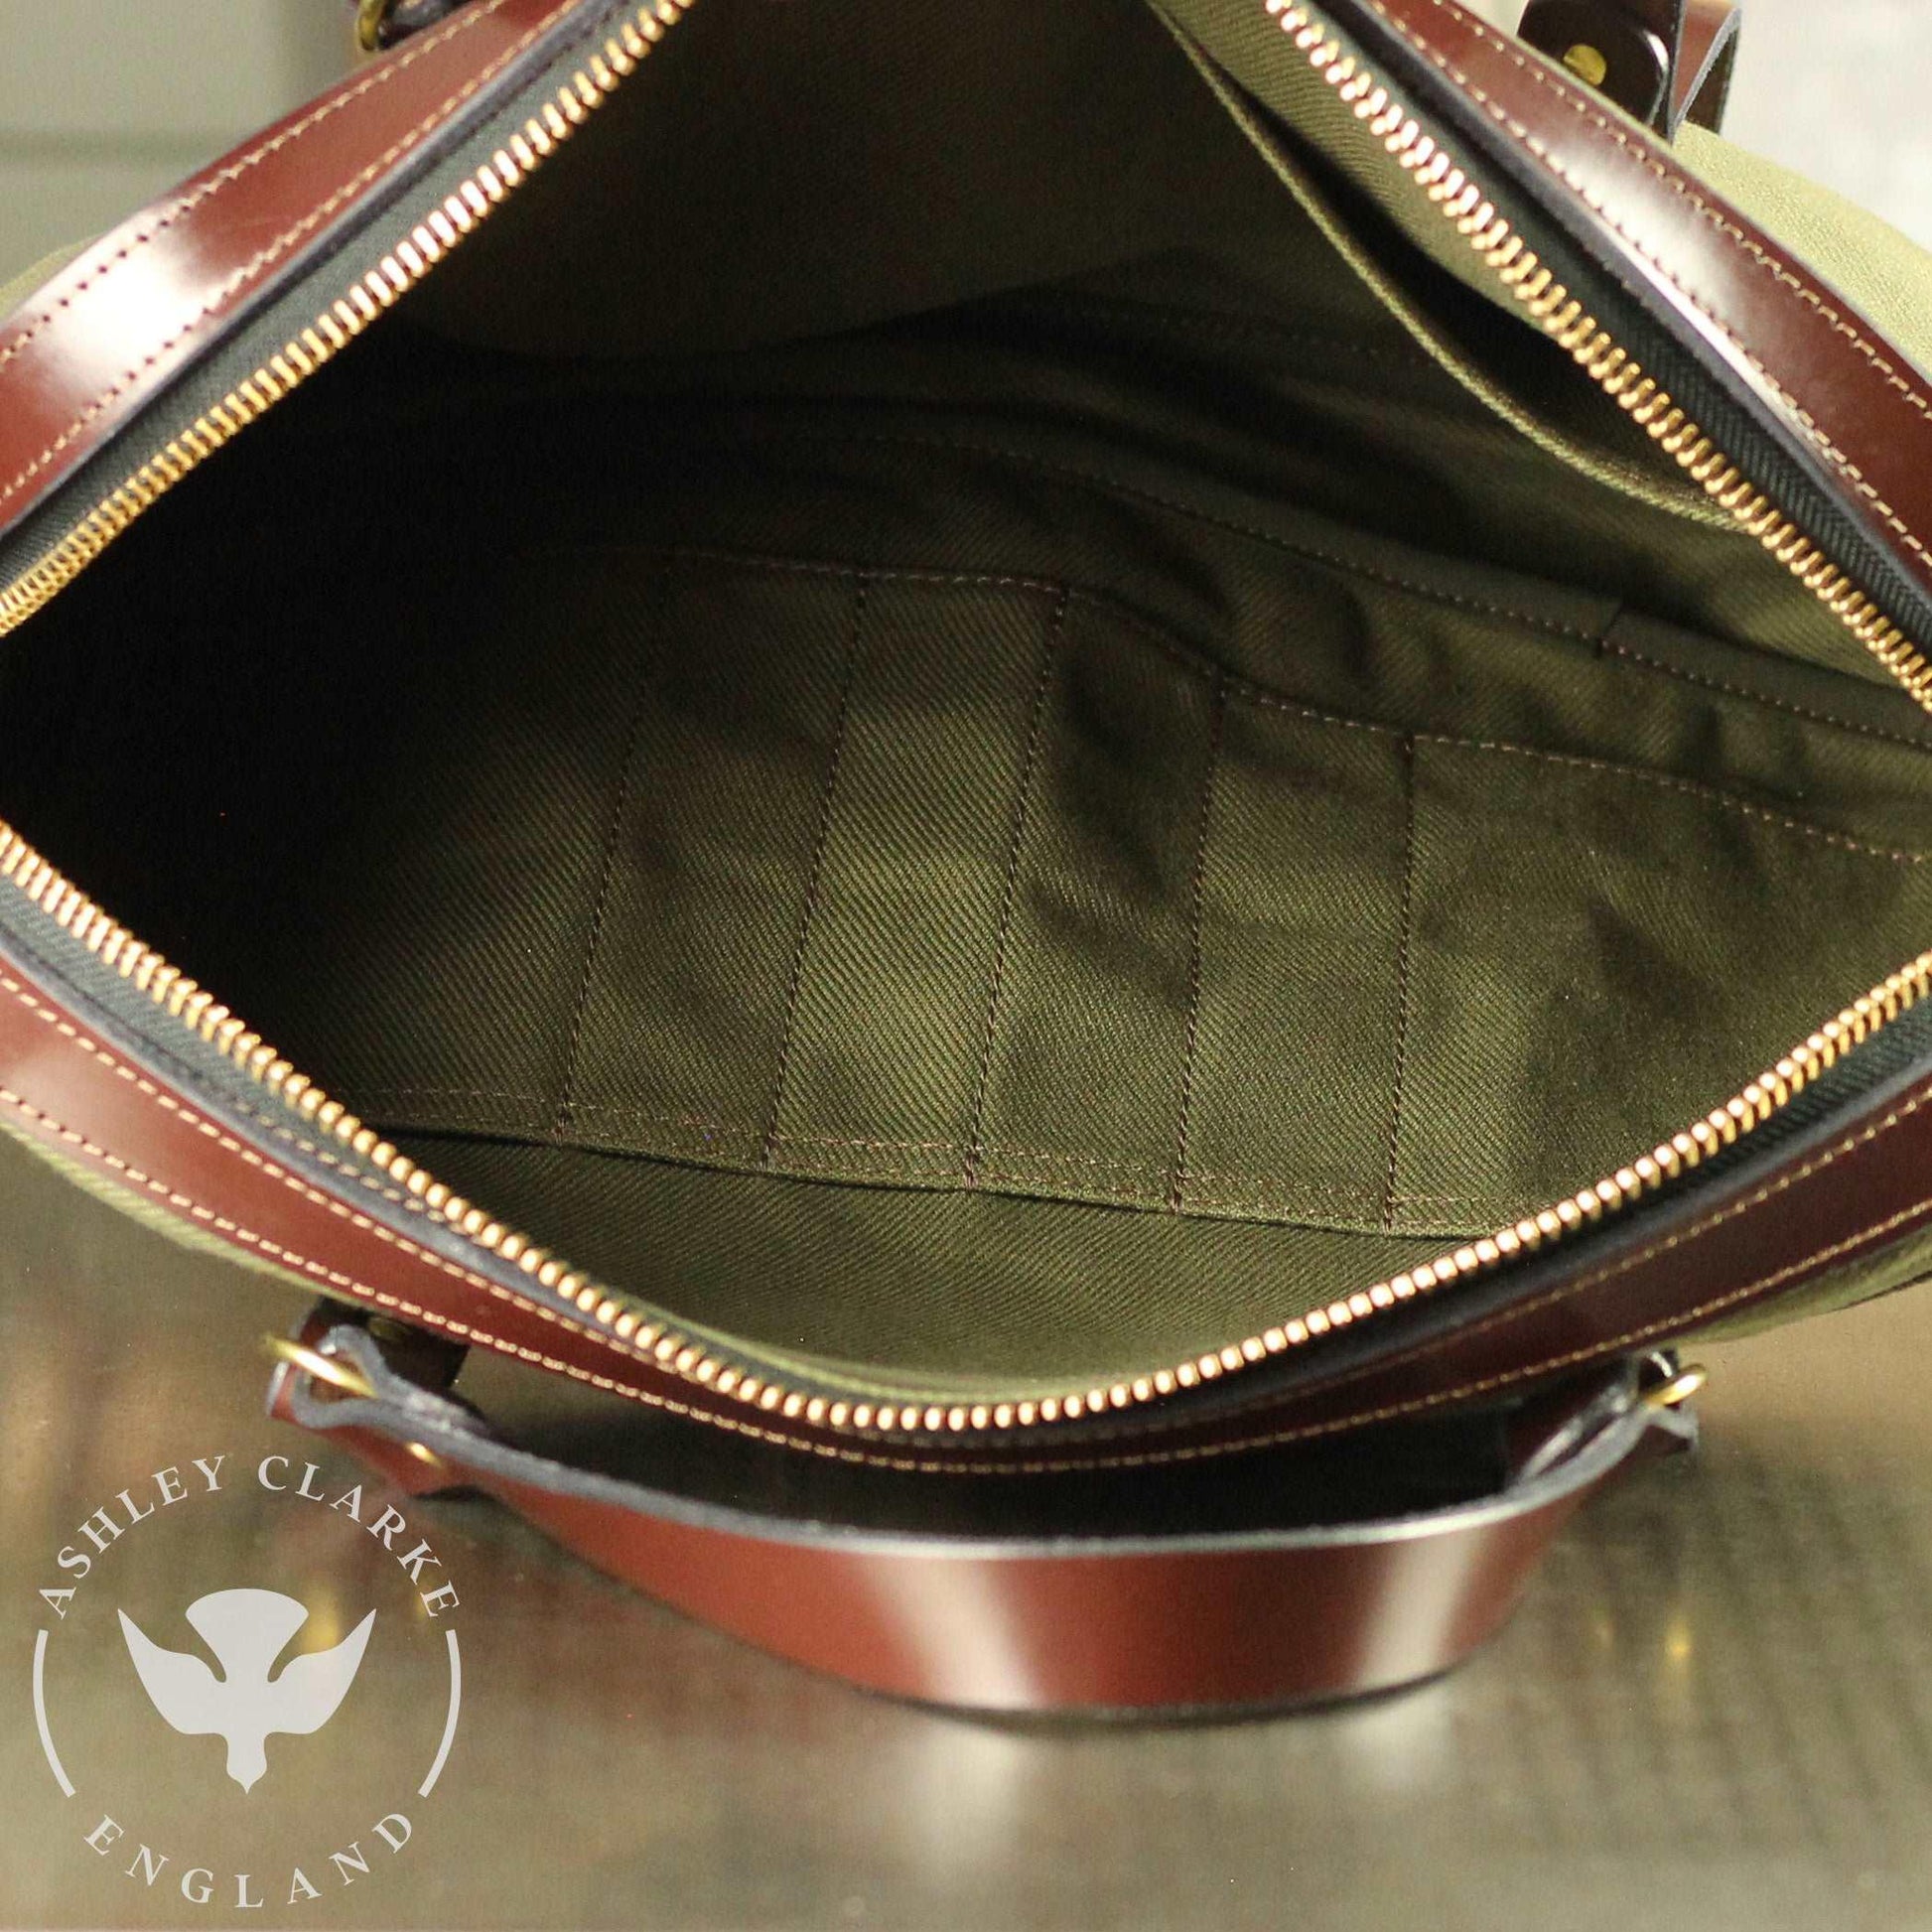 interior look of an Ashley Clarke England waxed canvas laptop bag with bridle leather accents